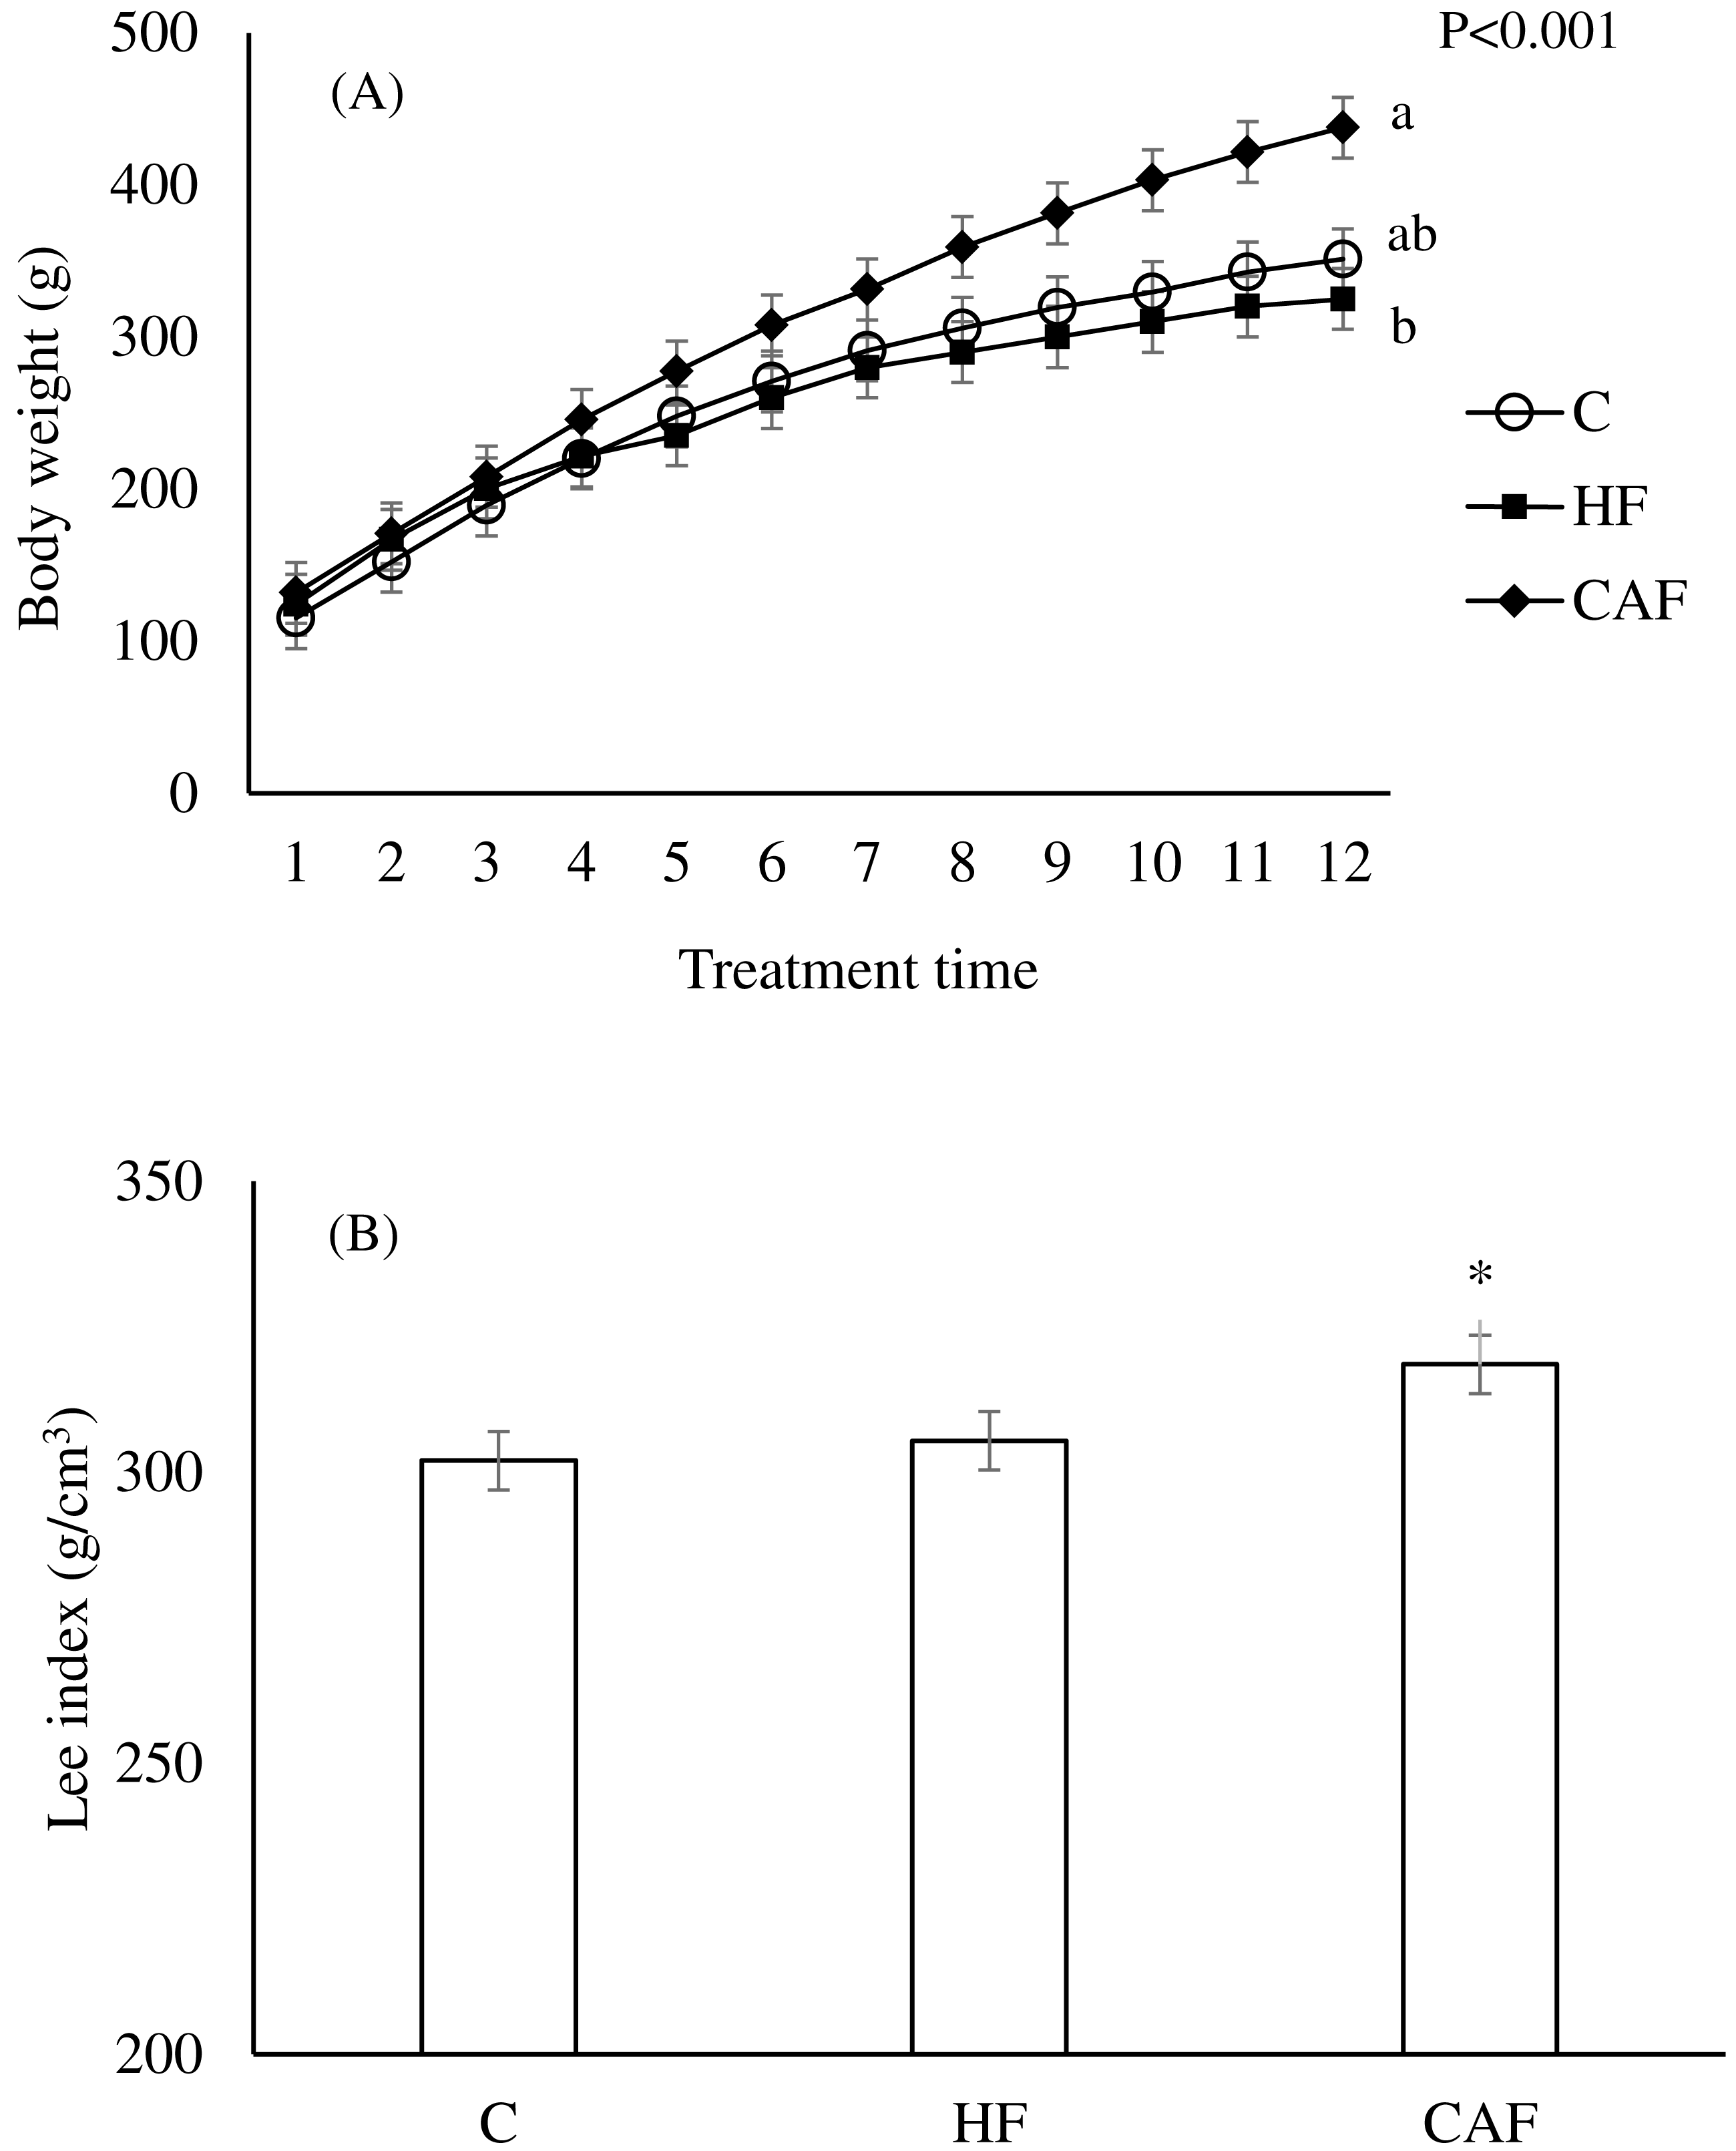 Cafeteria diet increased adiposity in comparison to high fat diet in young  male rats [PeerJ]